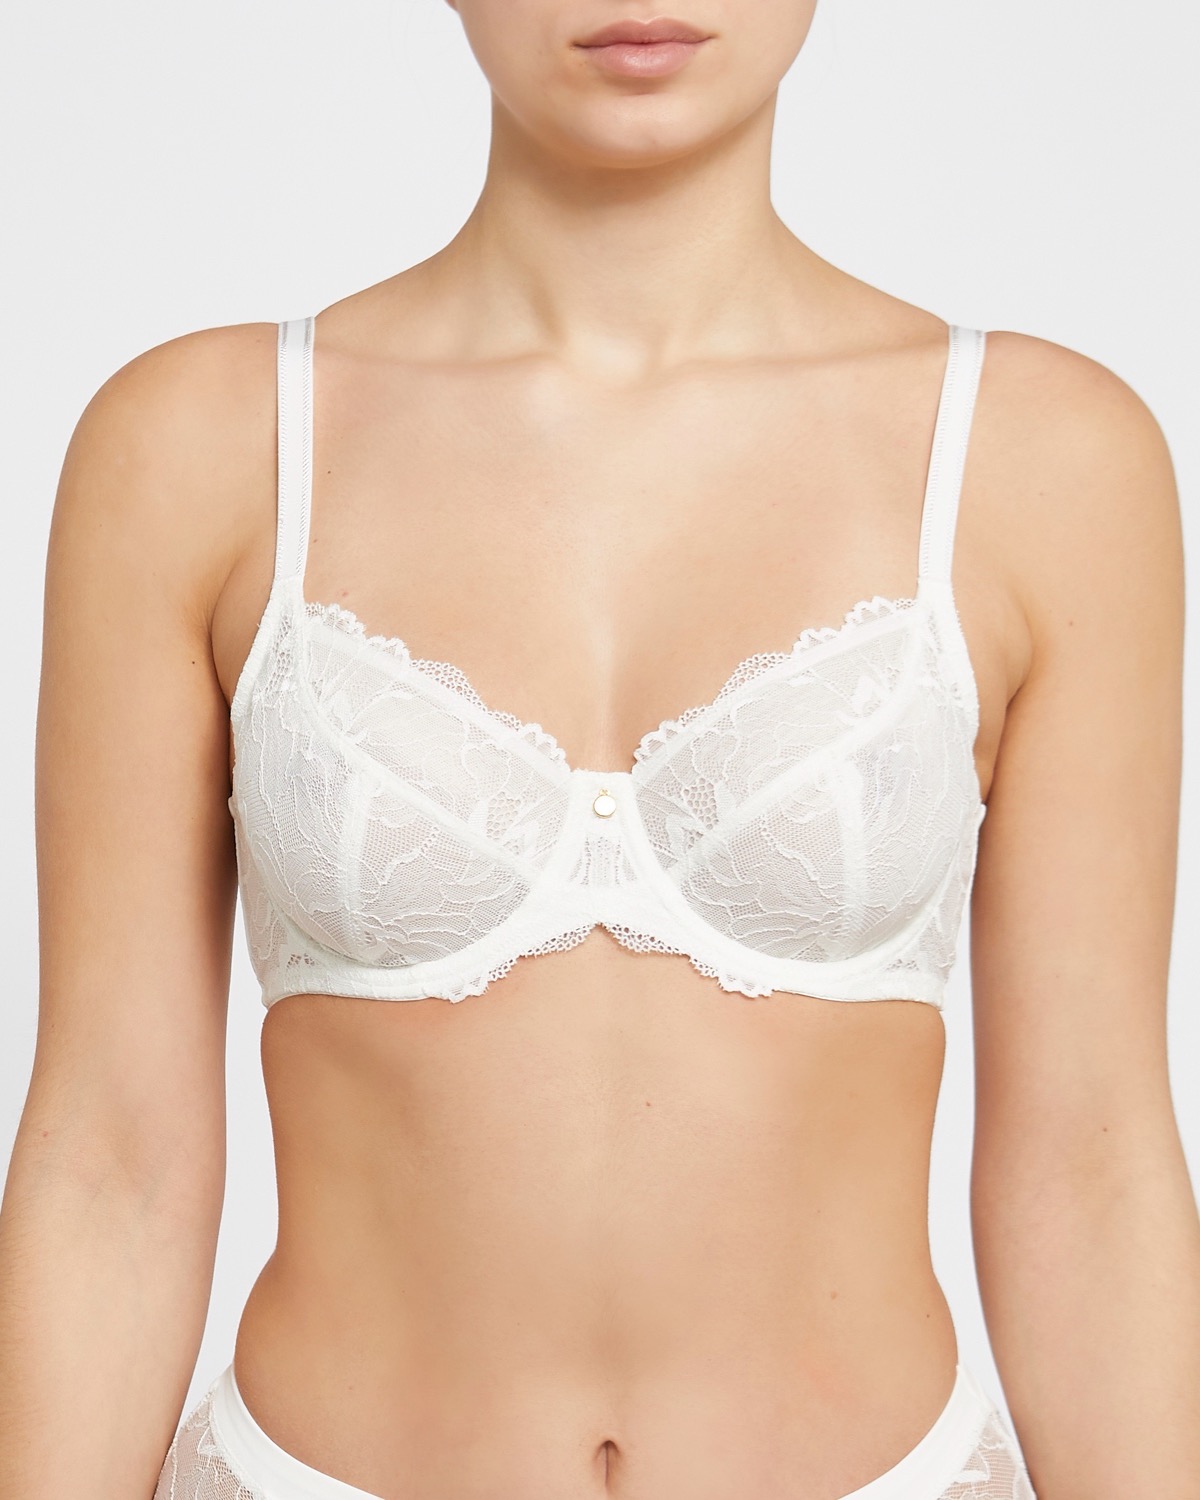 BIG BUST EUROPEAN Bra, Half Padded, Gift for Her -  Norway